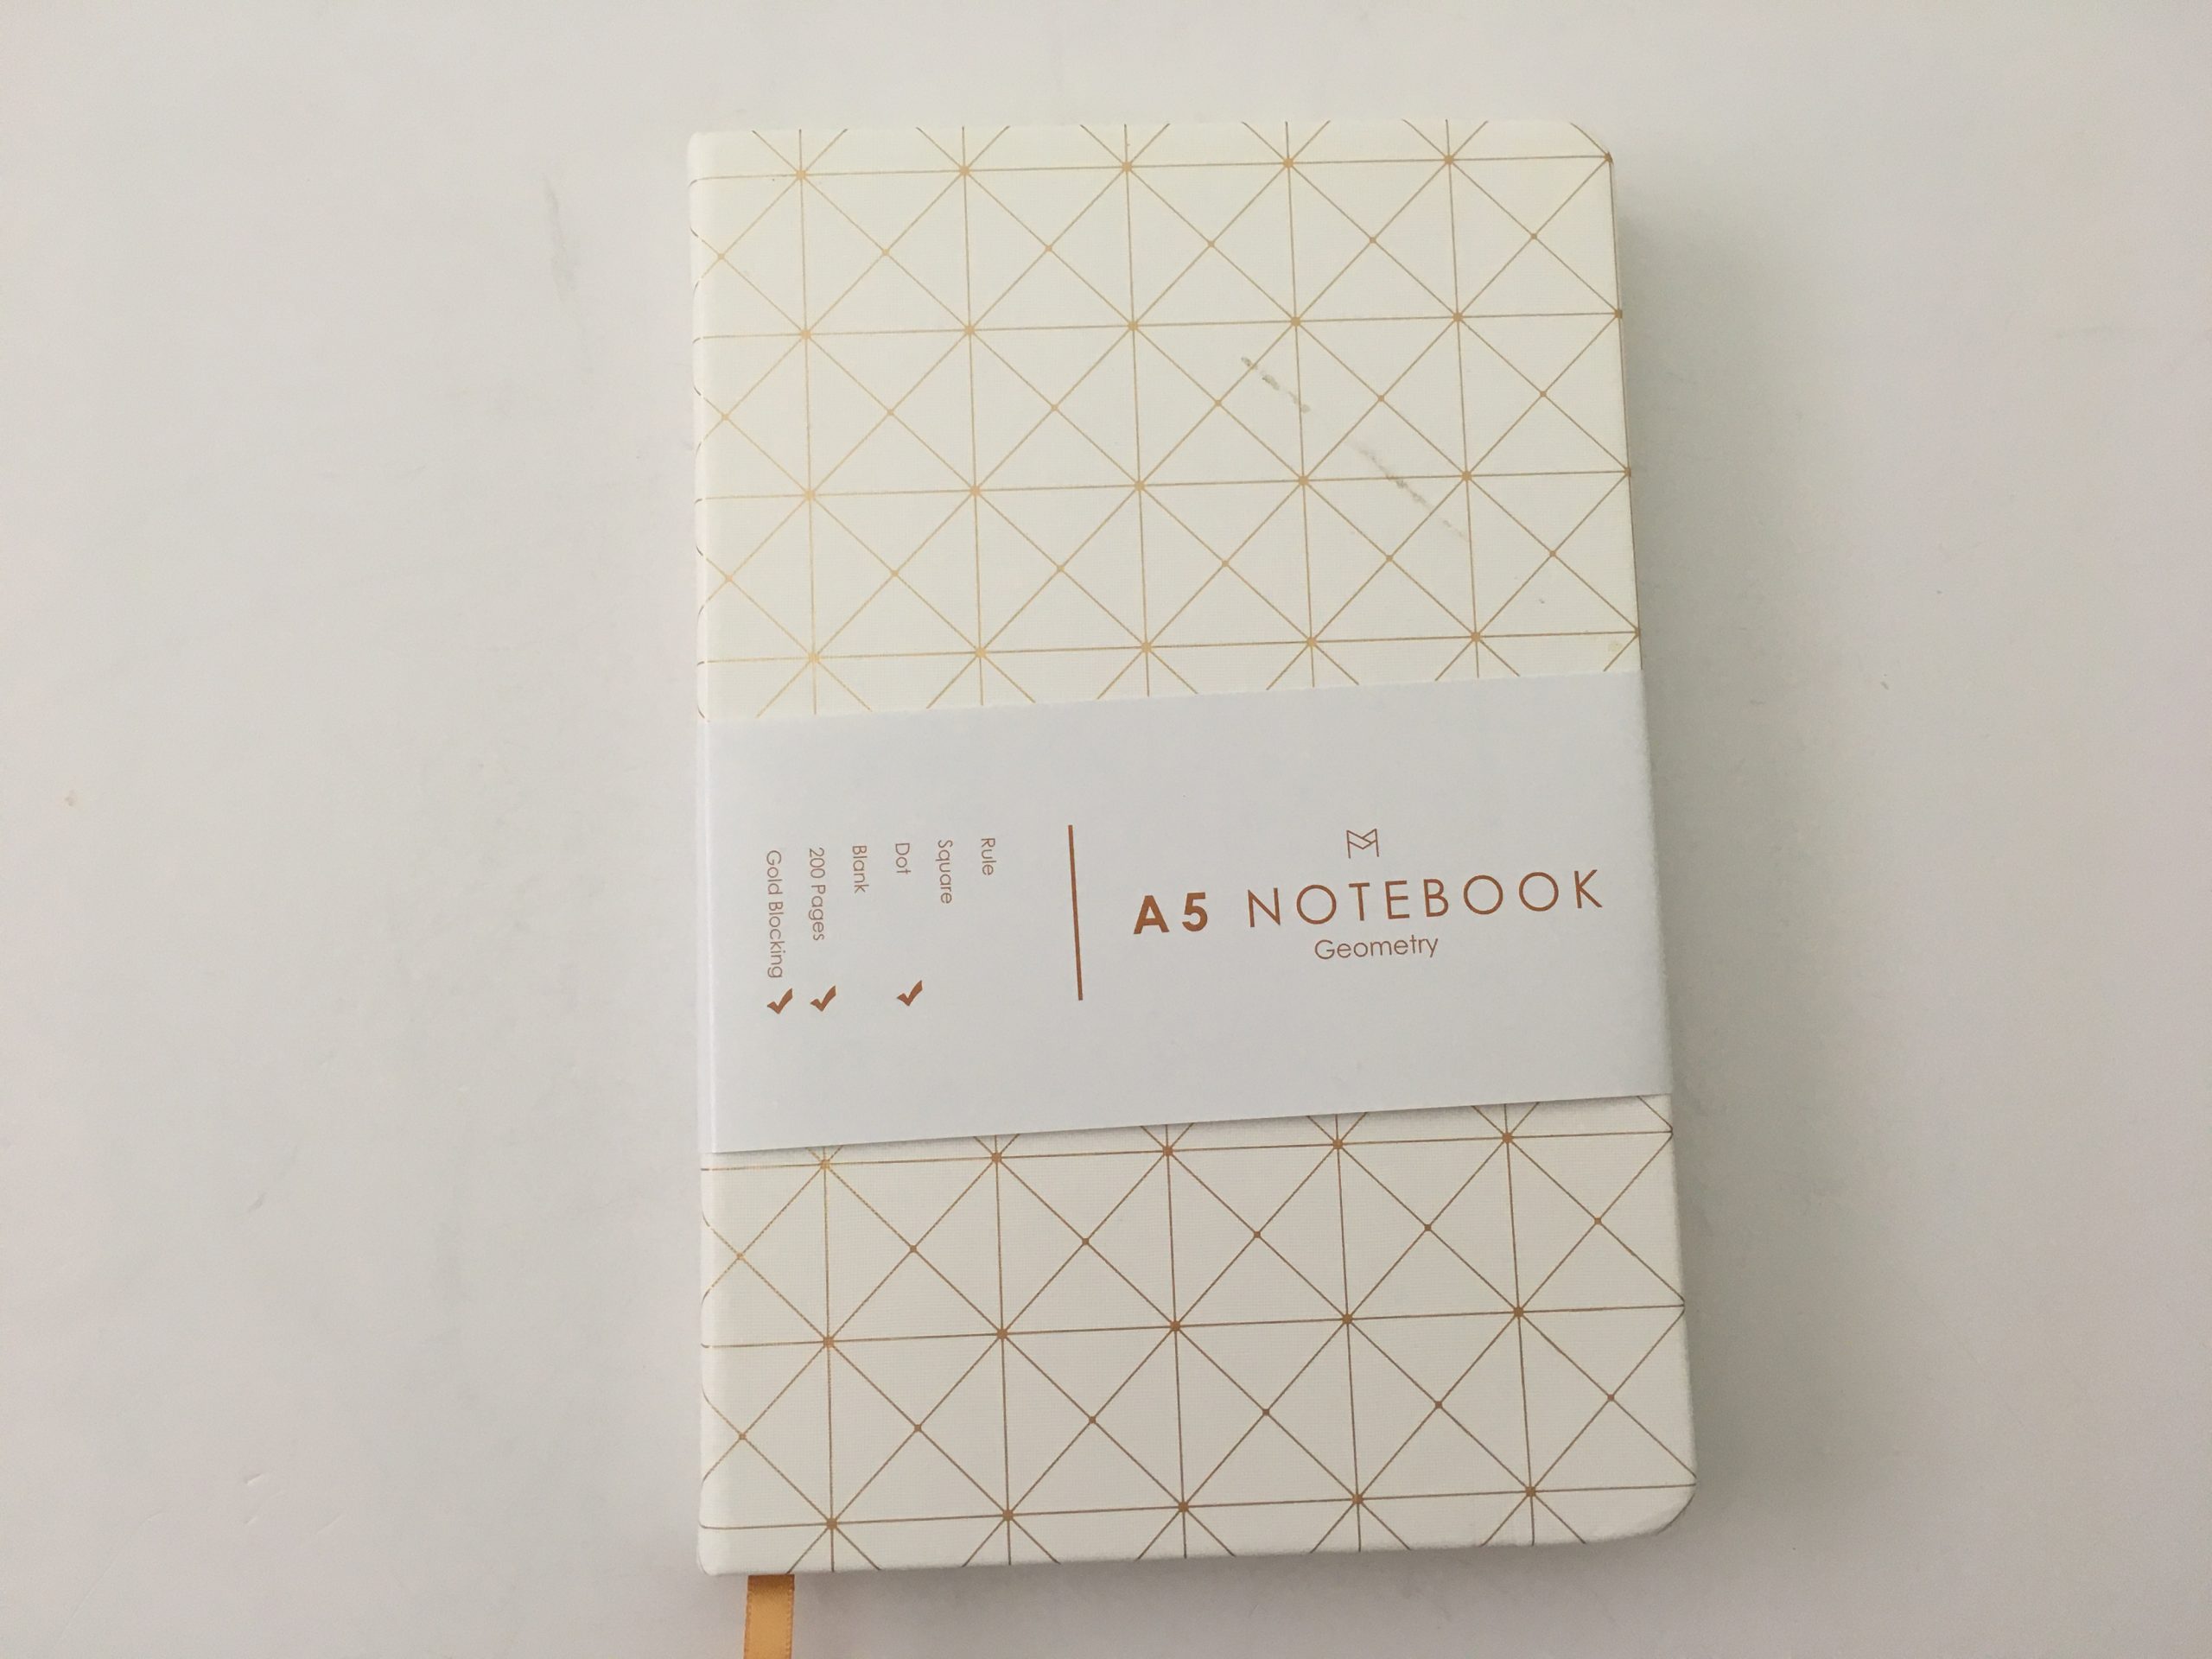 Miliko dot grid notebook review pros and cons pen testing pretty sewn bound bujo classy white cover 5mm dot grid white amazon pen testing paper quality_01